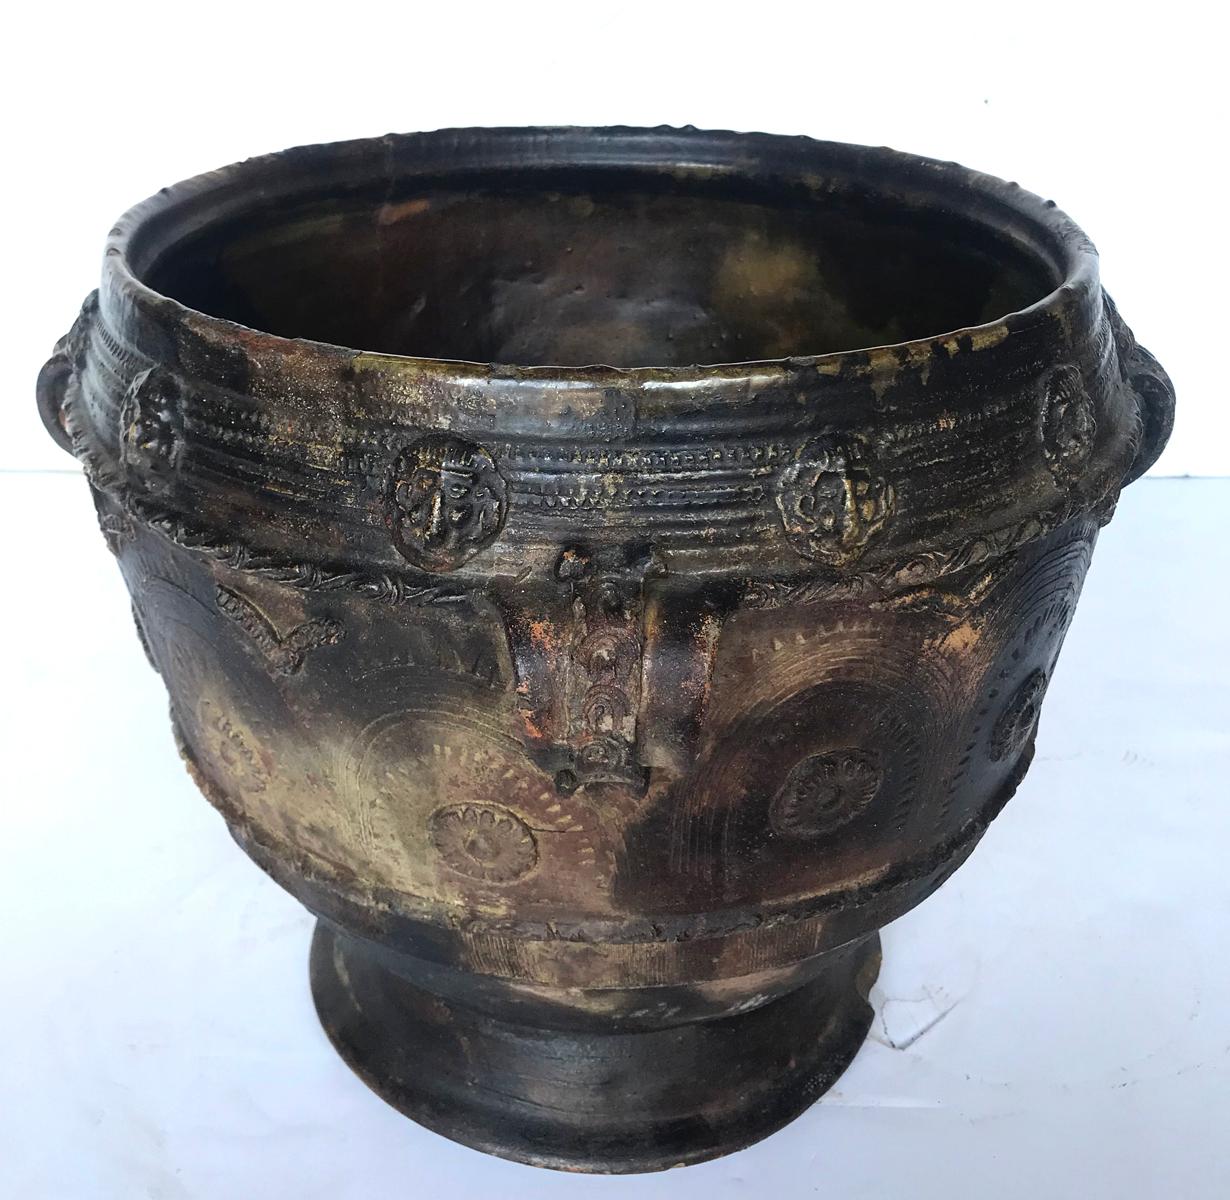 Early 20th century water pot, a Trubal, from the highlands of Central America. Delicate applied pottery decorations of faces surround the outer edge and more applied and carved designs on the body of the piece. Handmade, wood fired, resulting in a